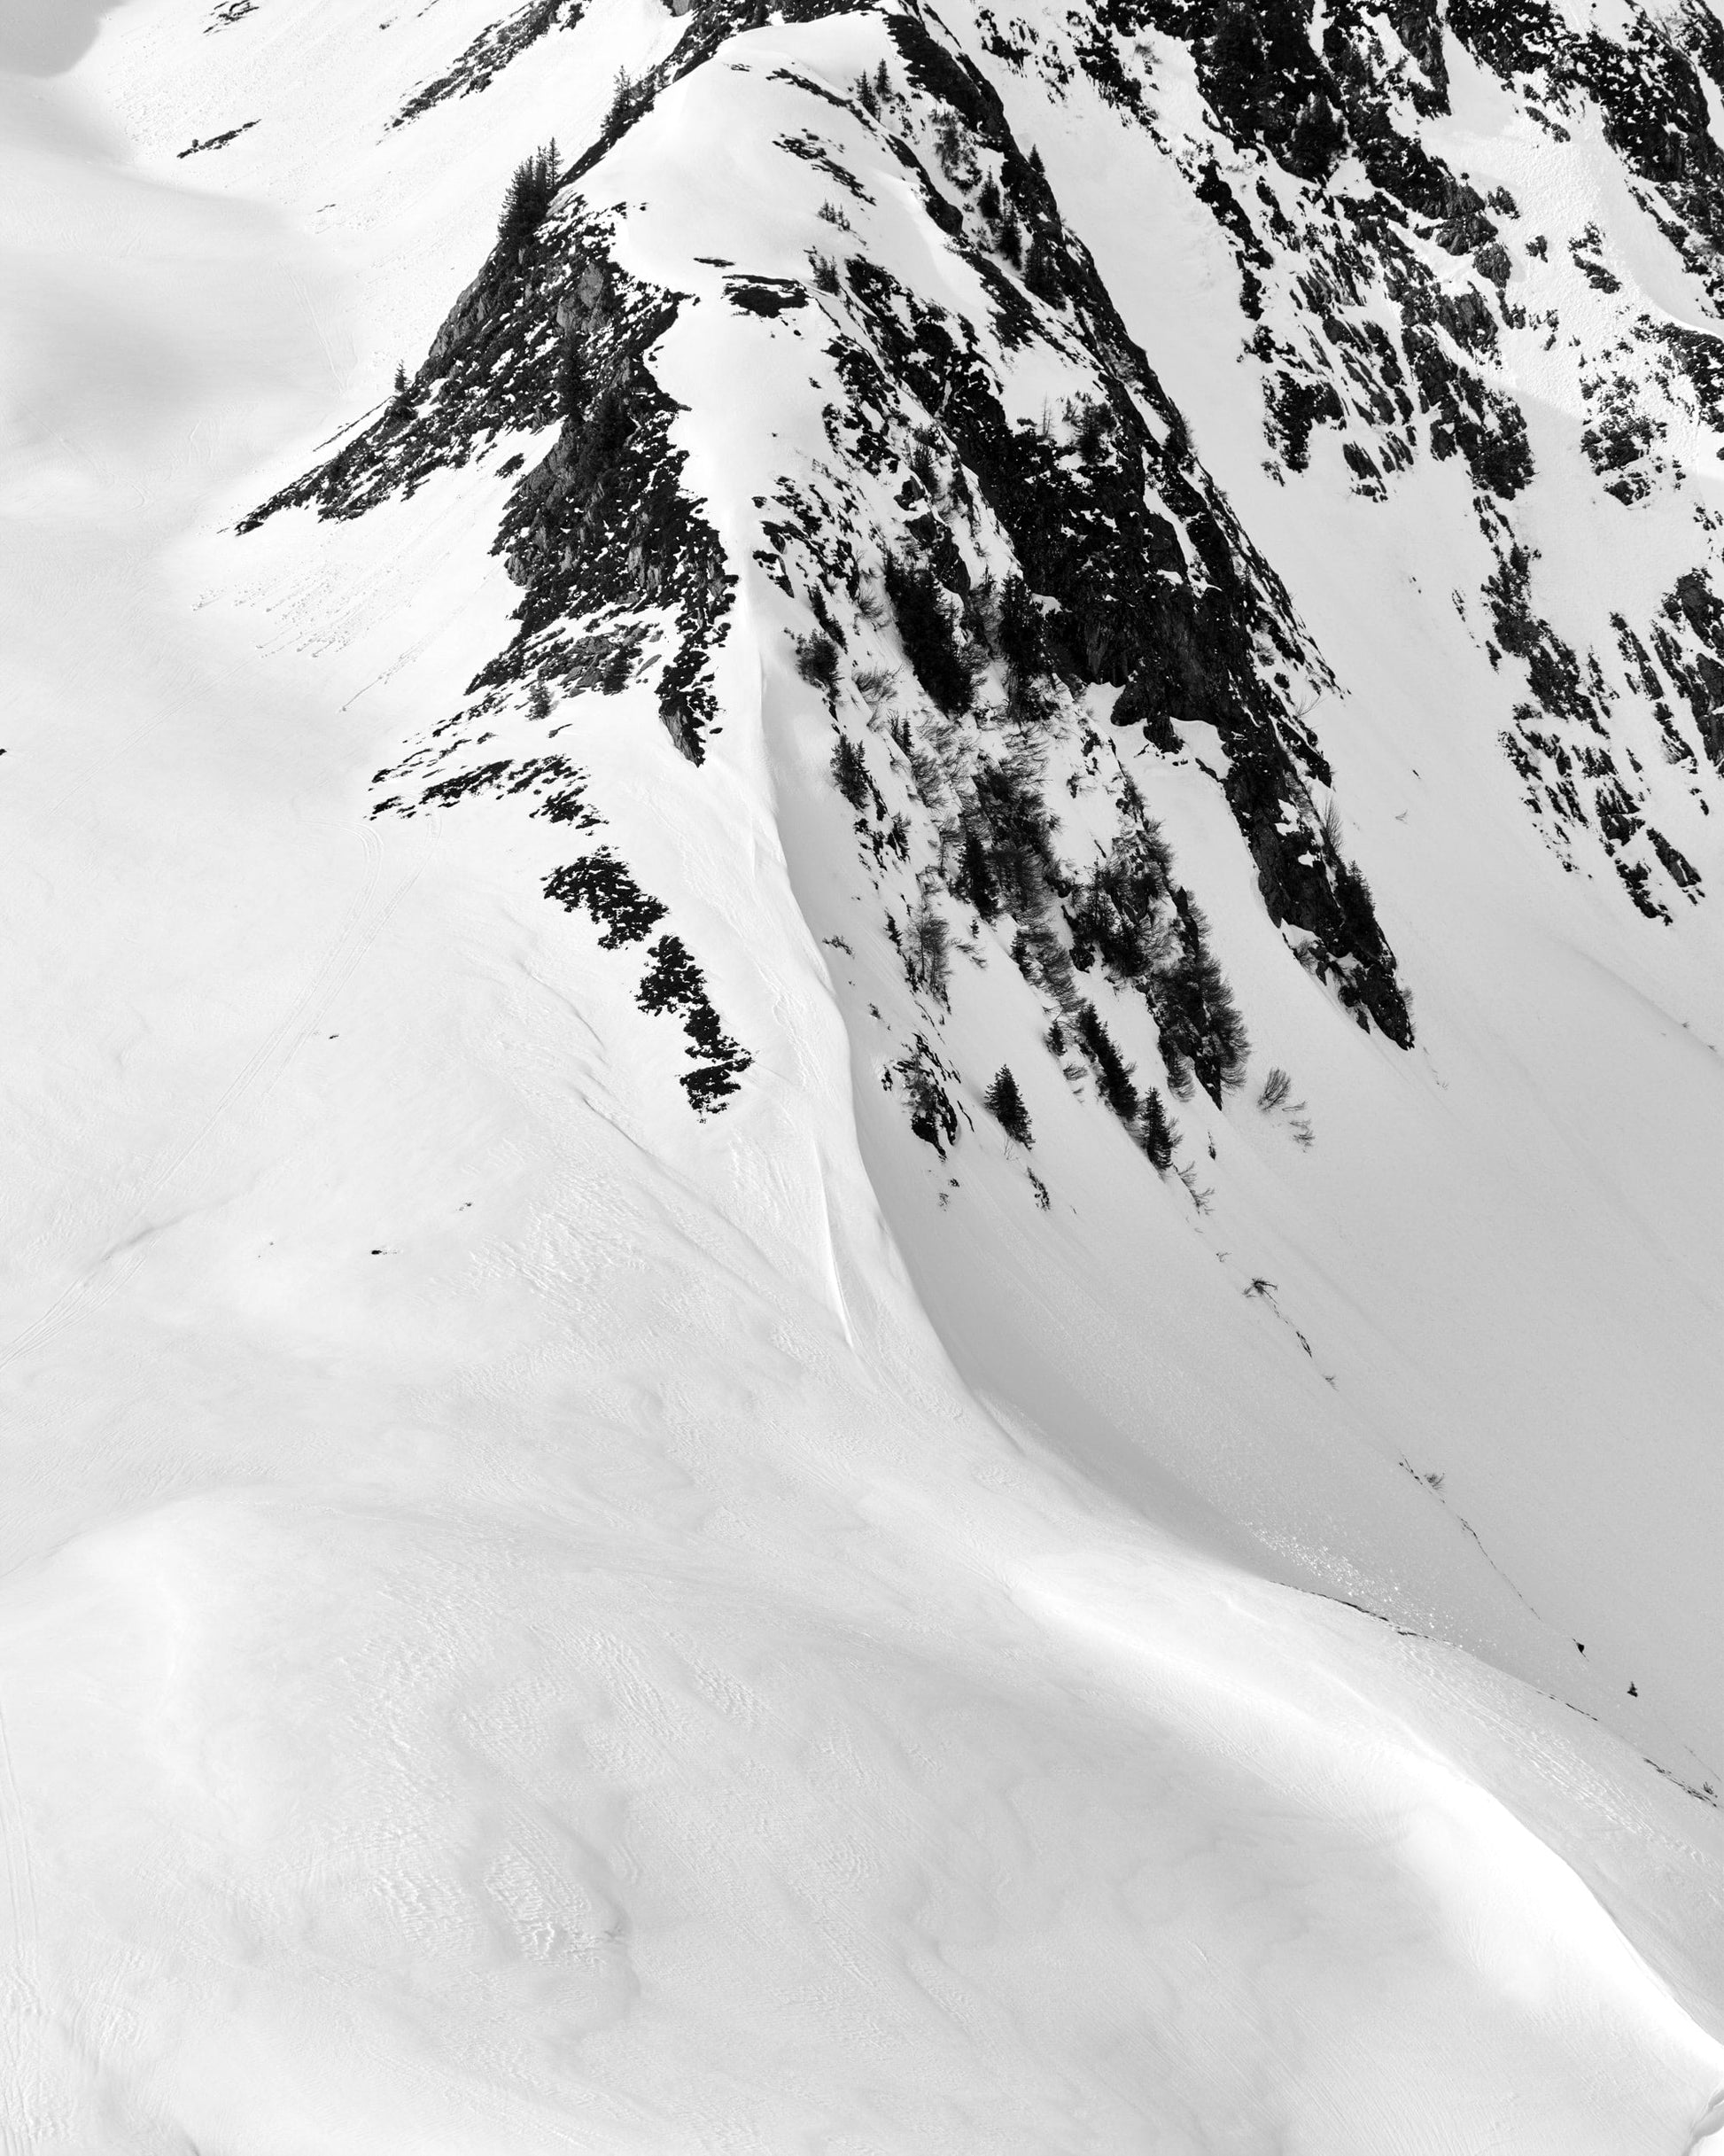 The artpiece 'Abhang' by Andreas Ortner shows part of a mountain ridge, mostly covered in snow except for the ridge where the rocky surface can be seen.